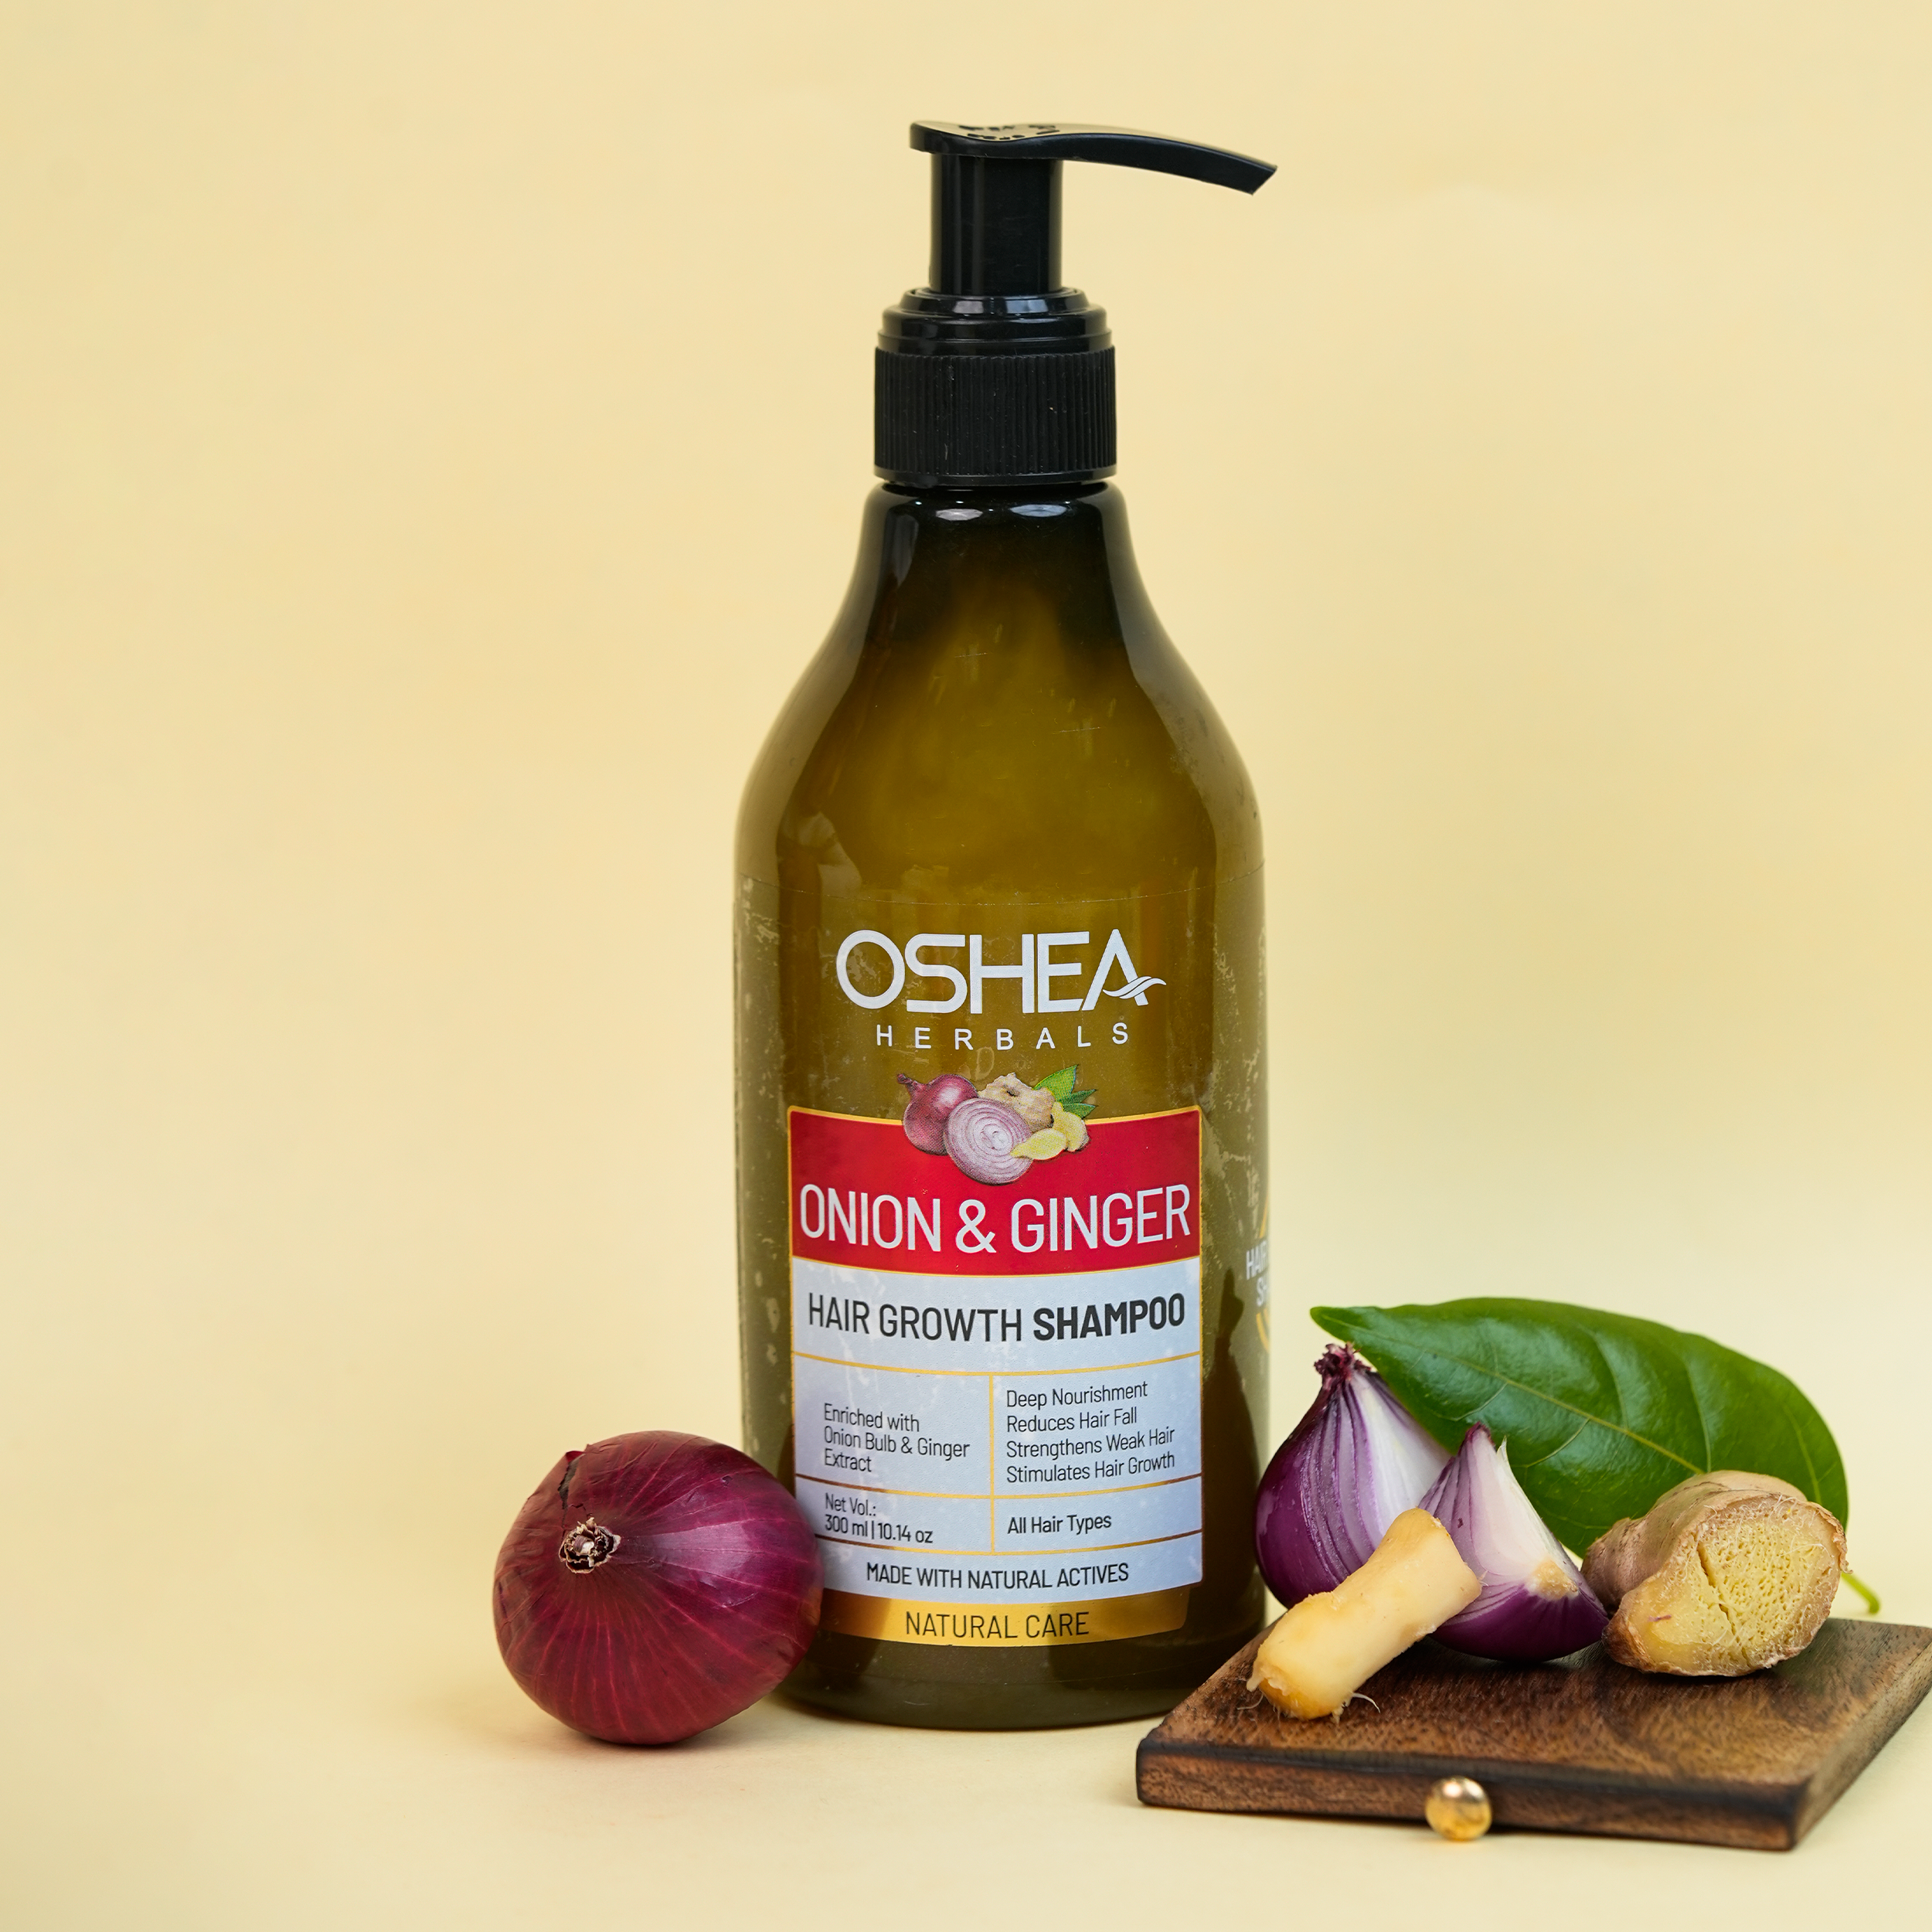 Onion And Ginger Hair Growth Shampoo Oshea Herbals